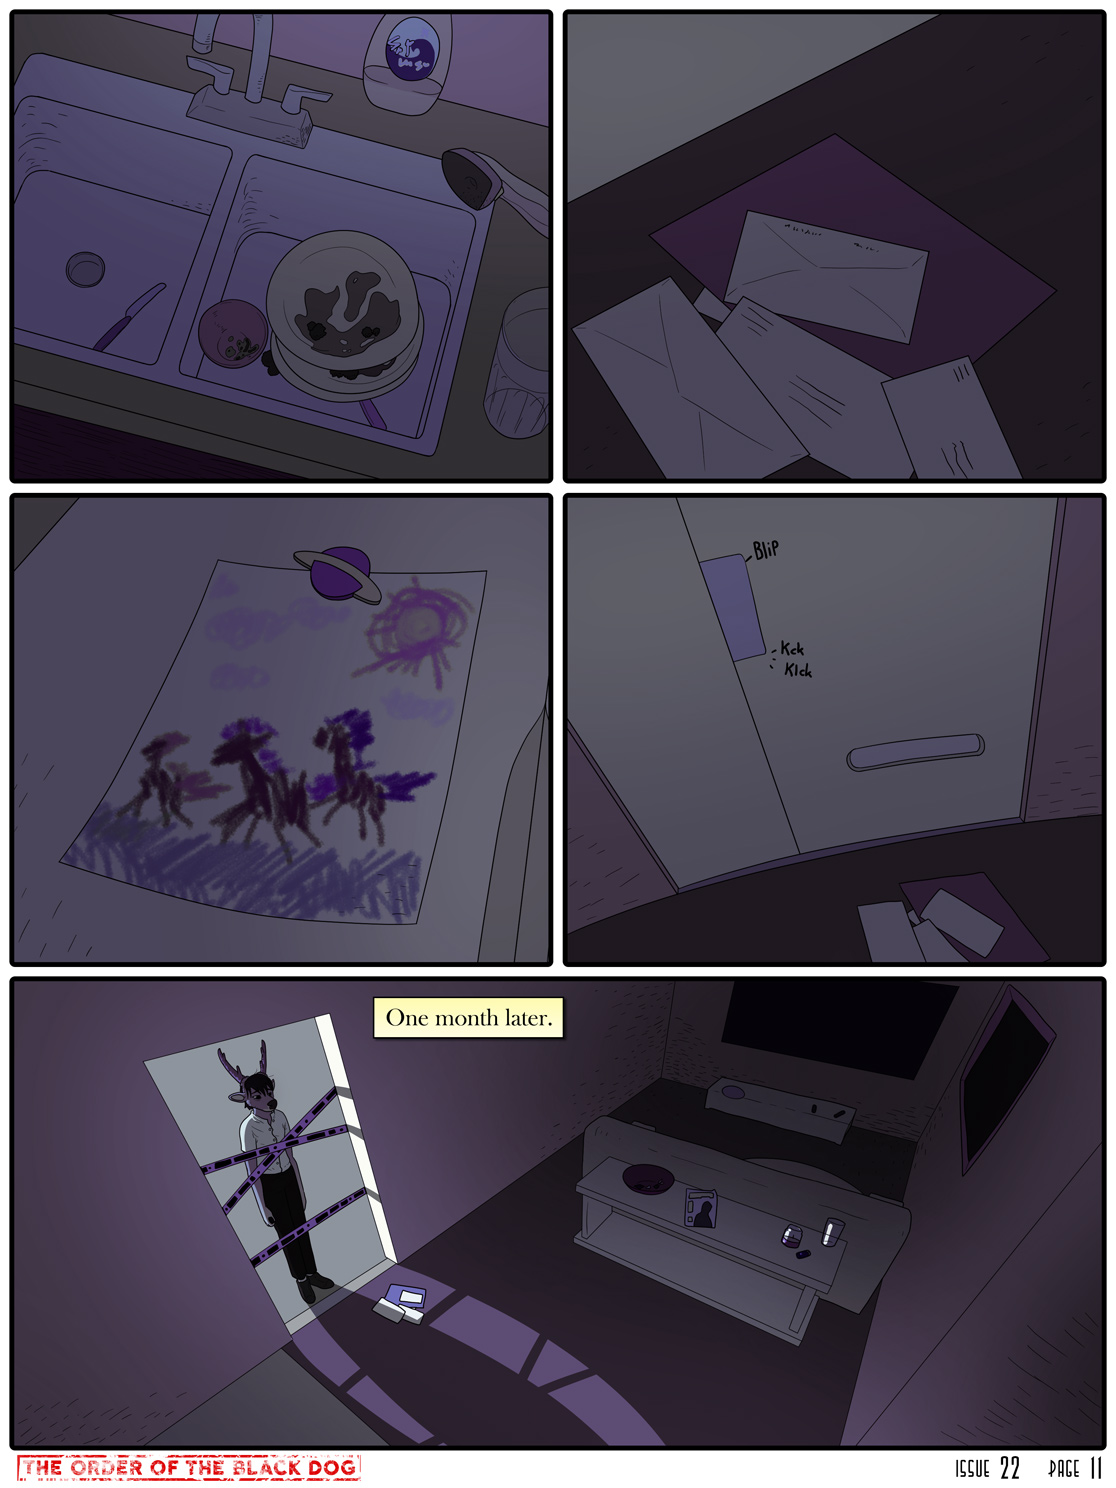 Issue 22, Page 11